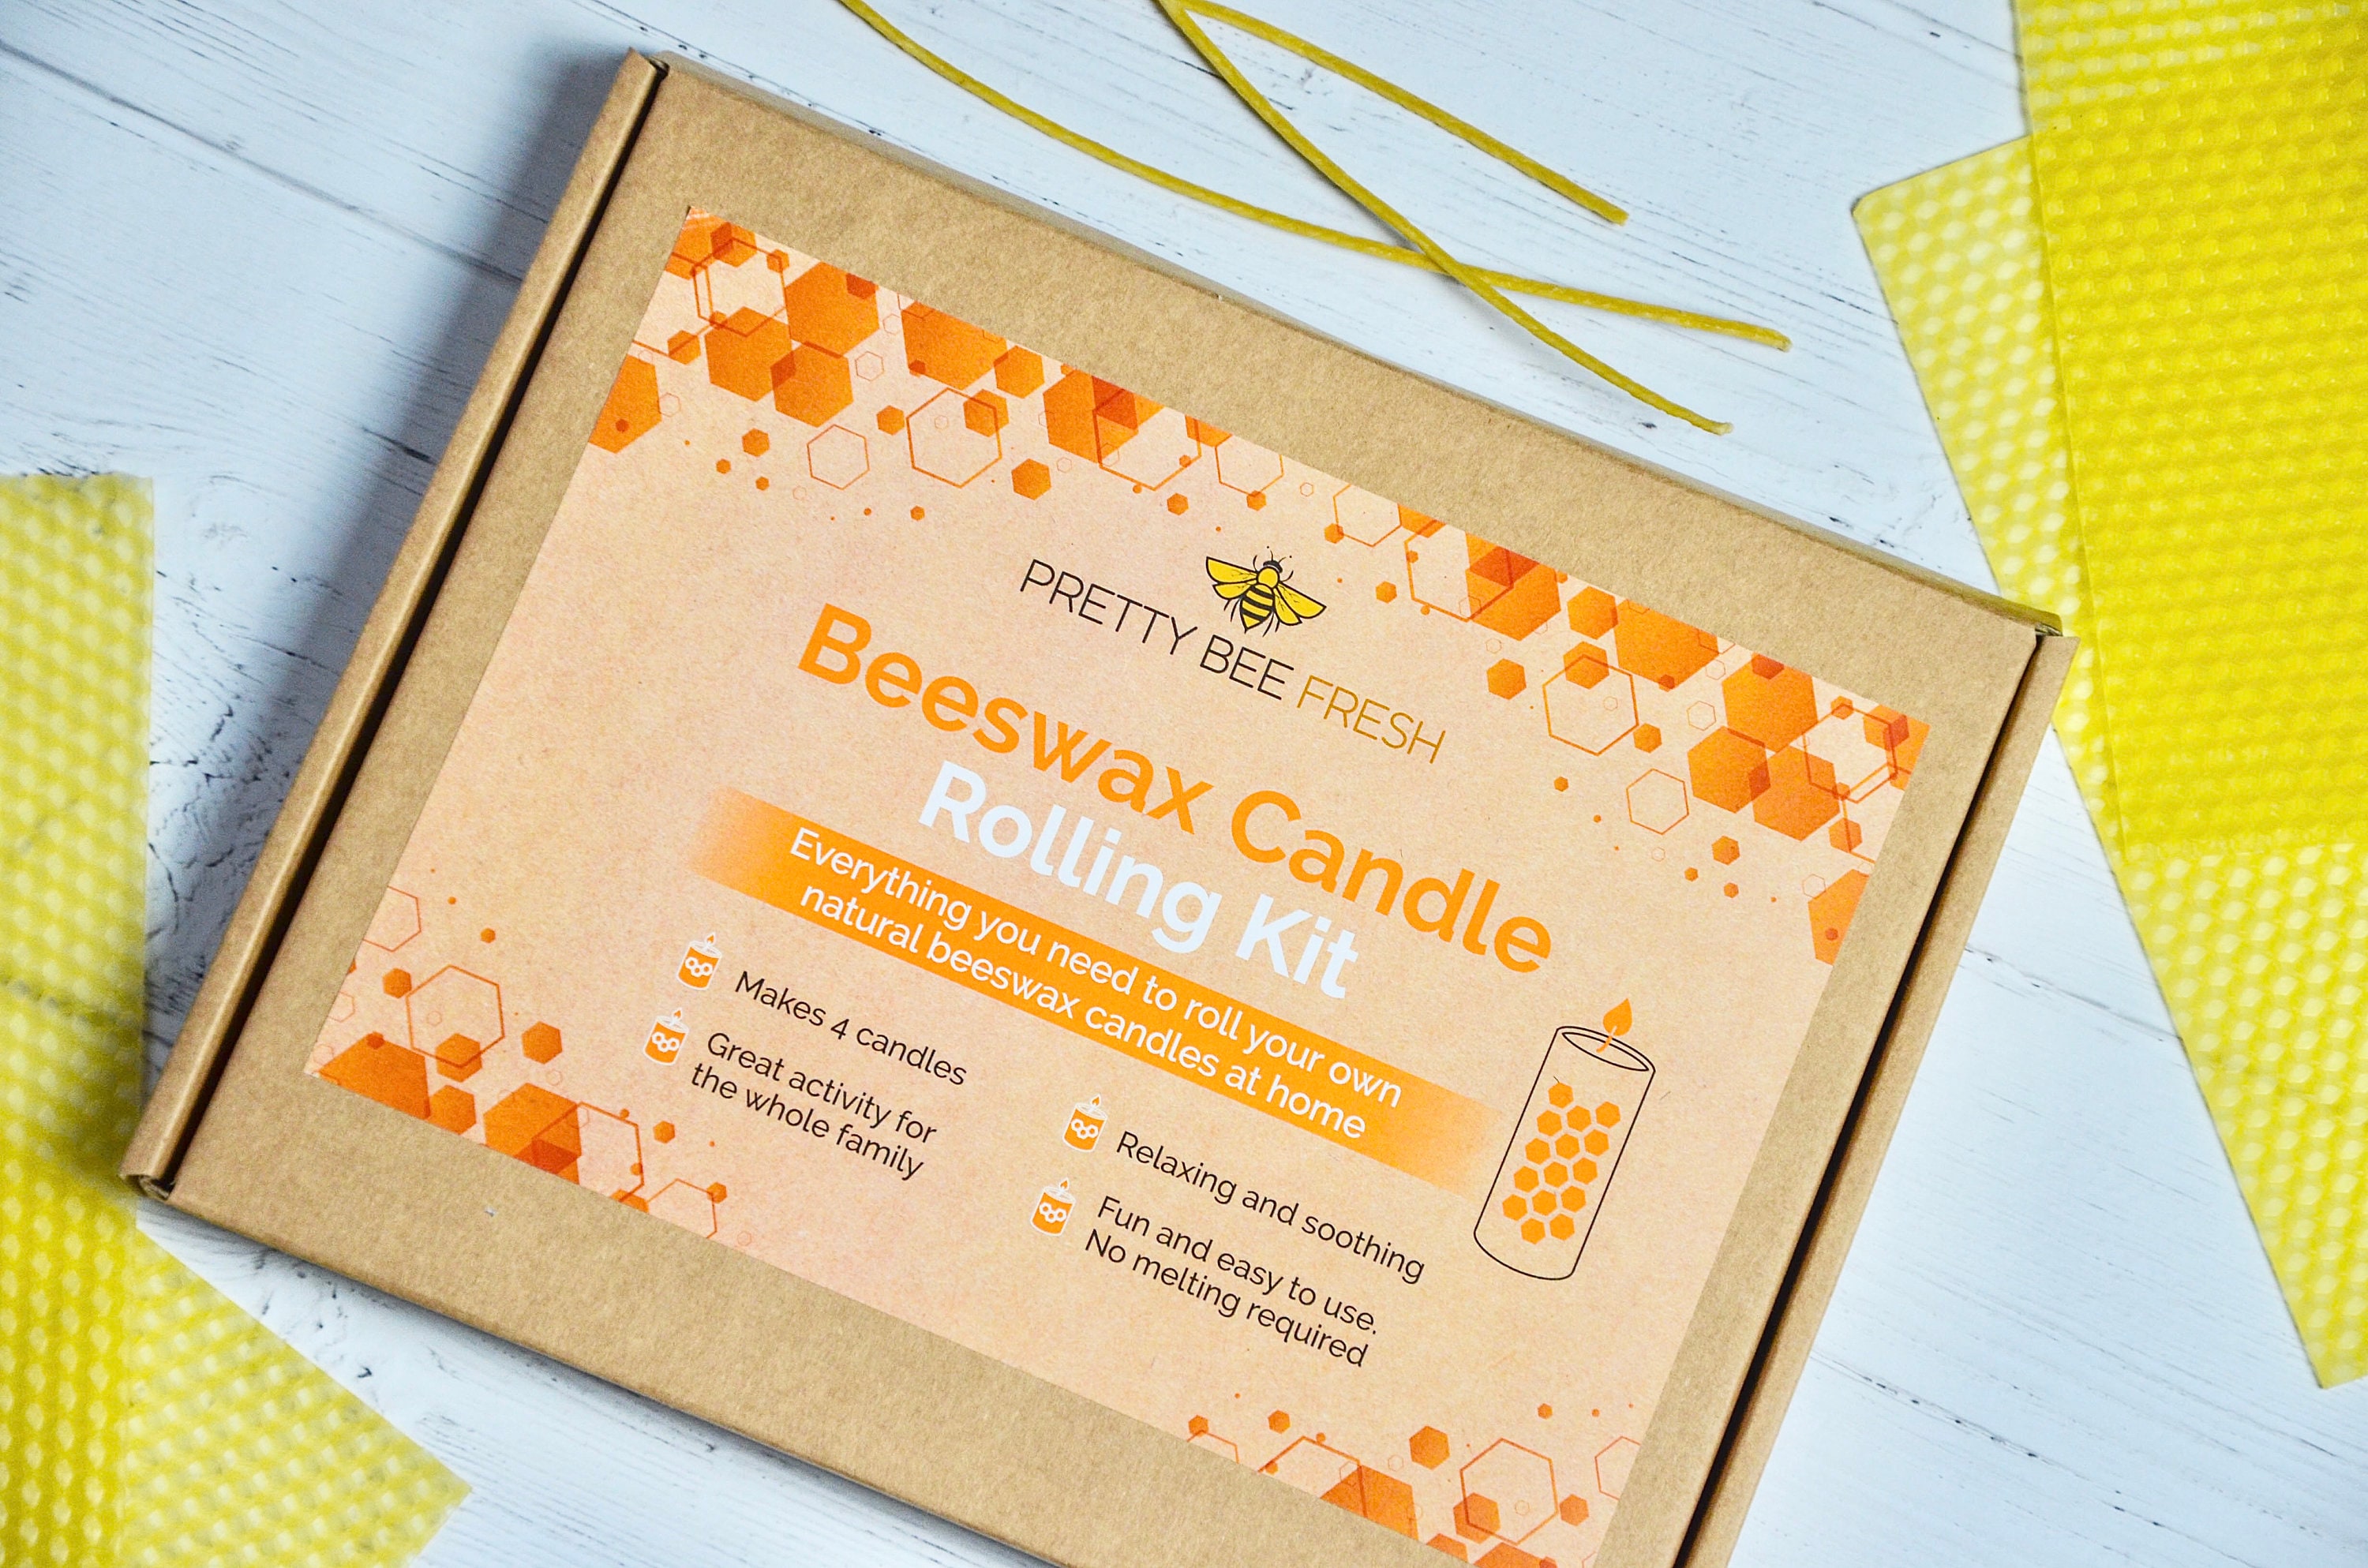 Beeswax Candle Making Kit, Beeswax Sheets for Candles, 10 Pcs 23 X